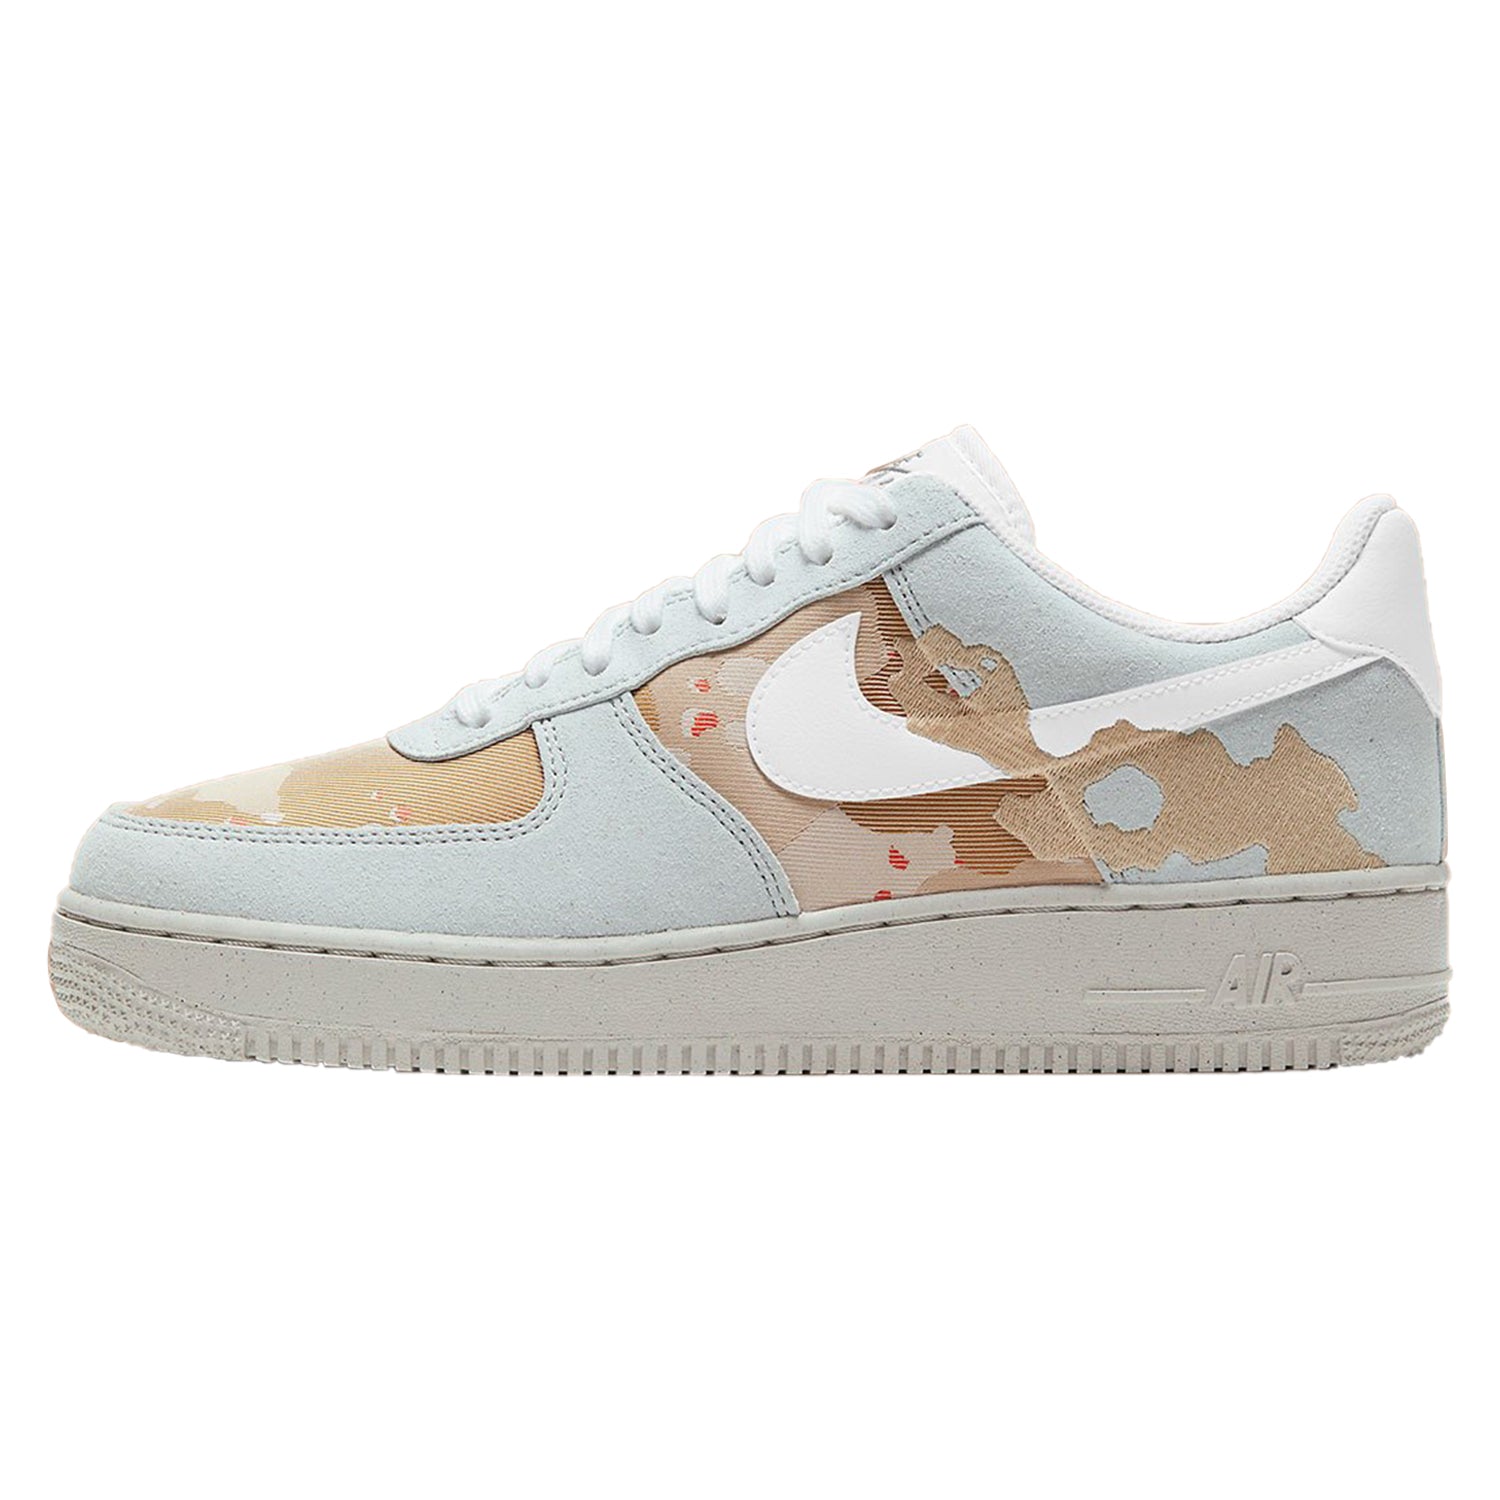 Nike Air Force 1 Low '07 LX Embroidered Desert Camo